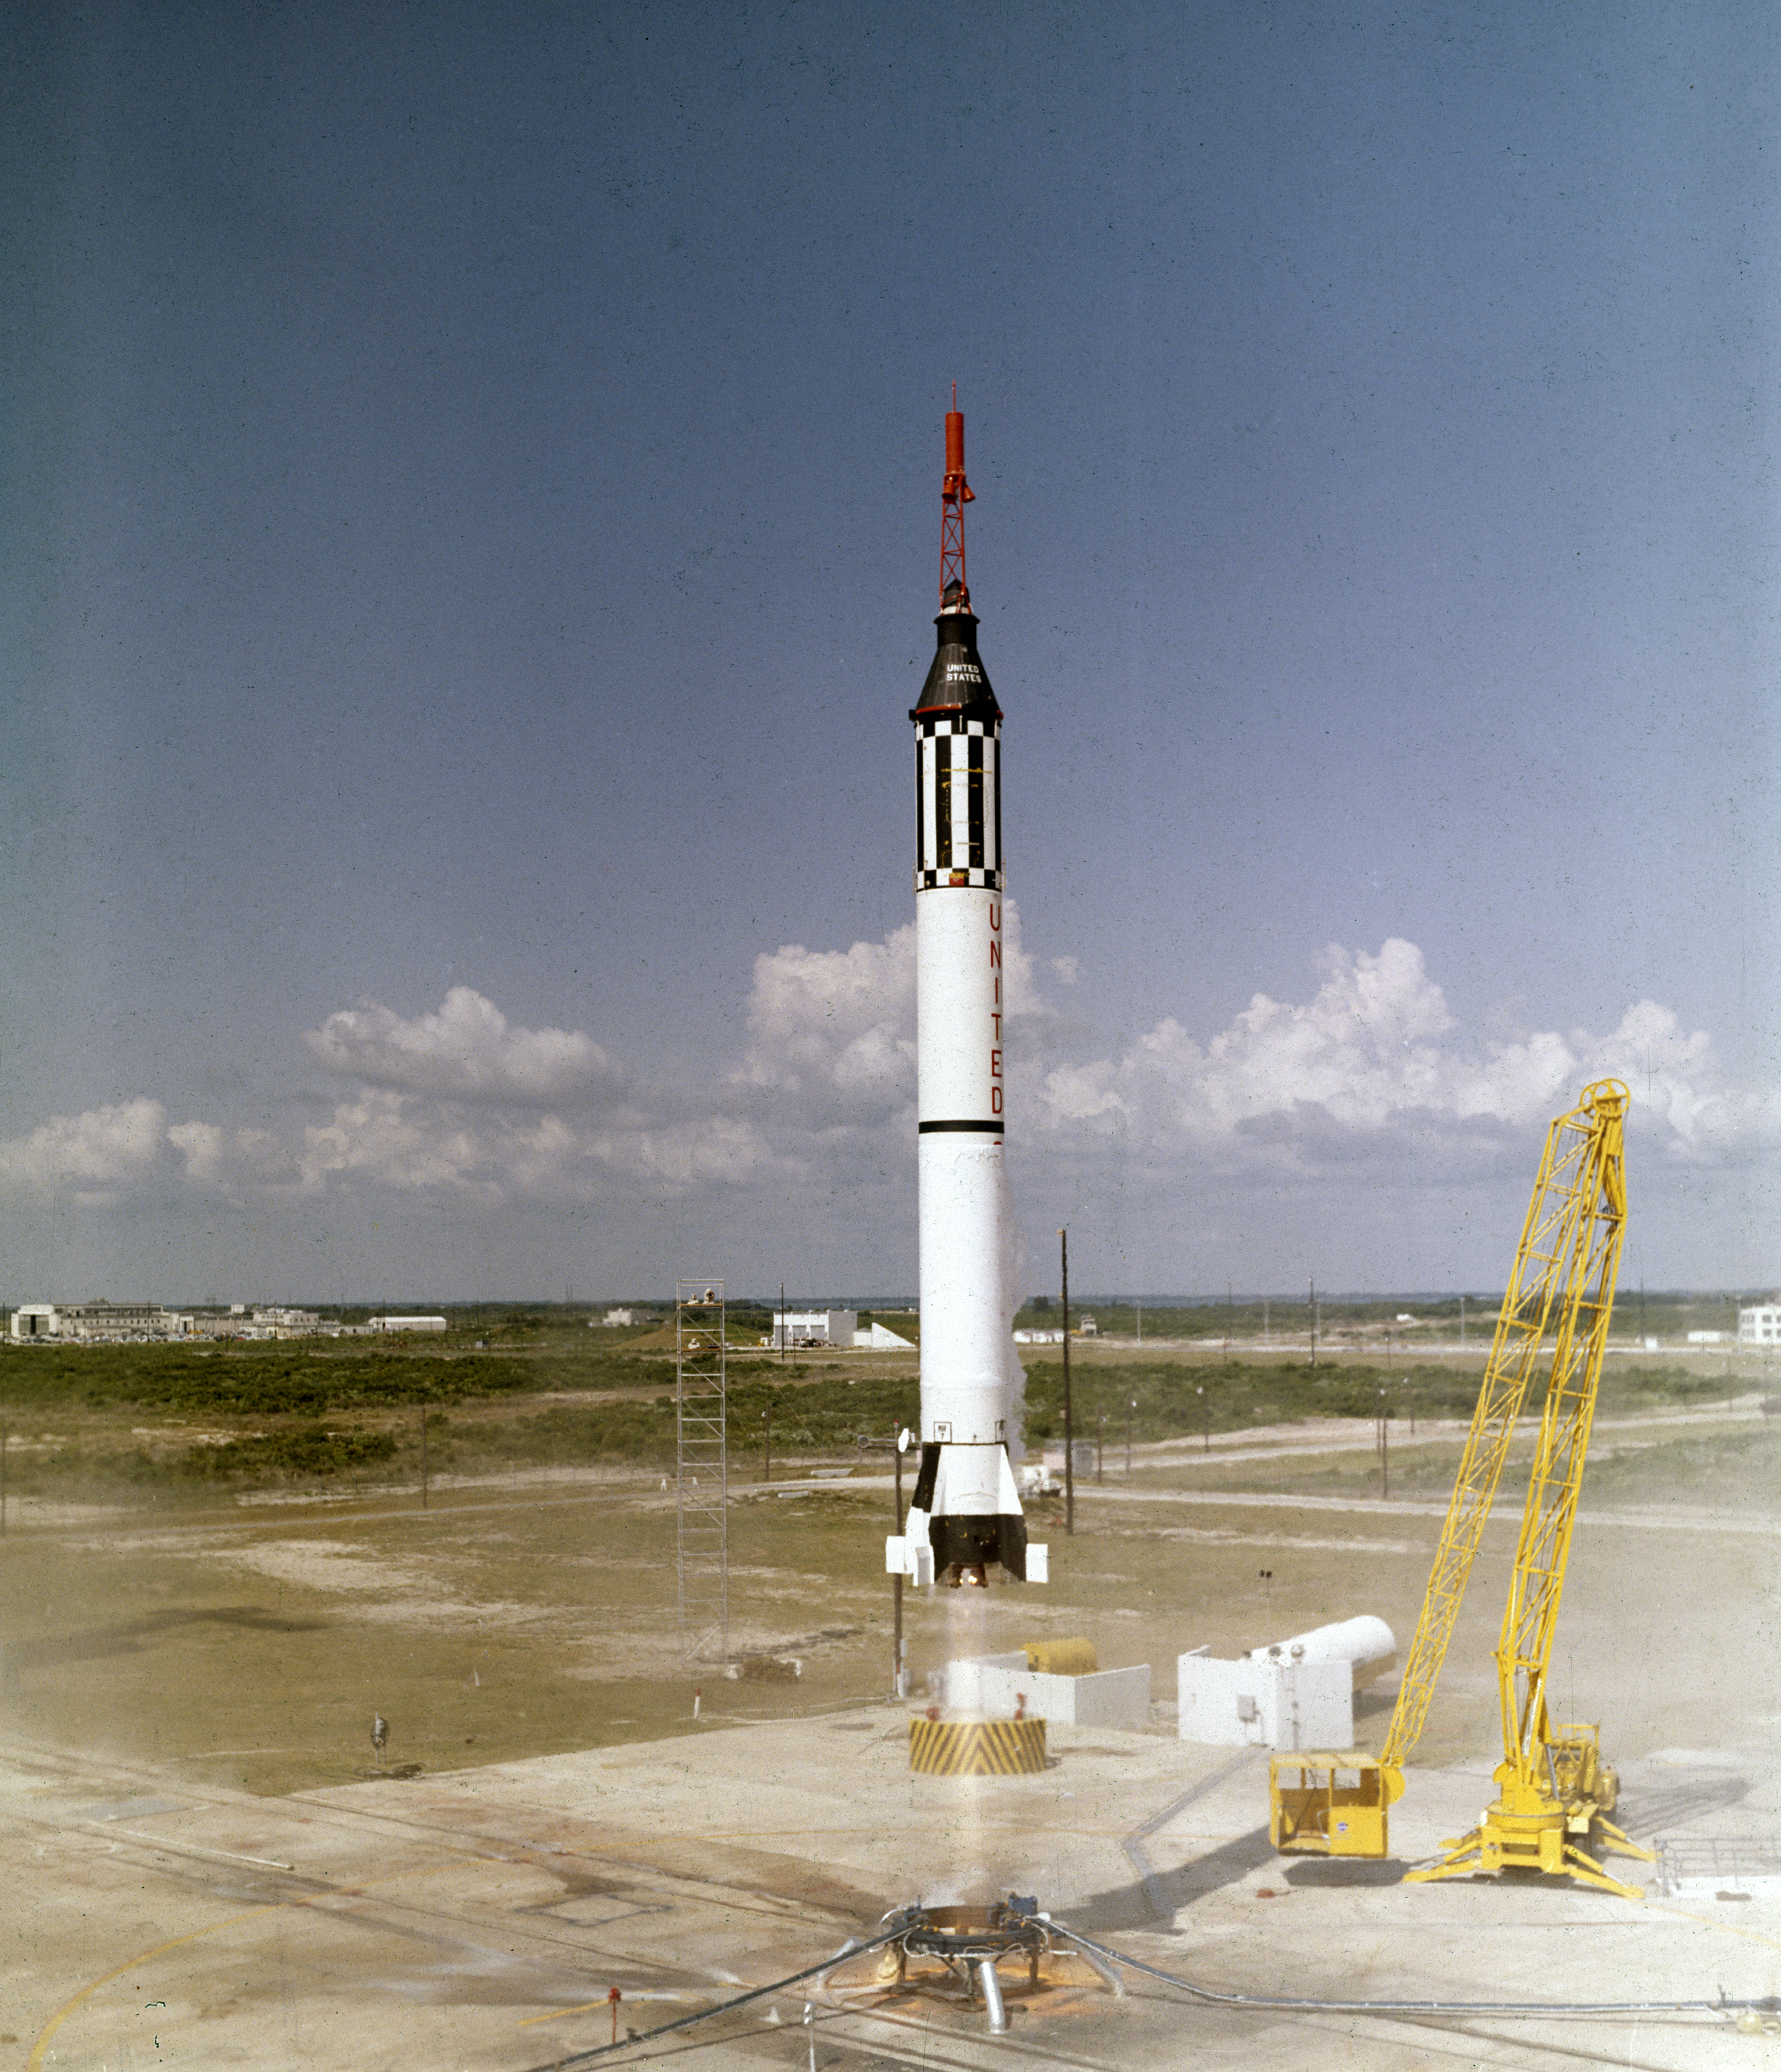 Astronaut Alan B. Shepard, Jr. lifts off in the Freedom 7 Mercury spacecraft on May 5, 1961. This third flight of the Mercury-Redstone (MR-3) vehicle, developed by Dr. Wernher von Braun and the rocket team in Huntsille, Alabama, was the first marned space mission for the United States. During the 15-minute suborbital flight, Shepard reached an altitude of 115 miles and traveled 302 miles downrange.